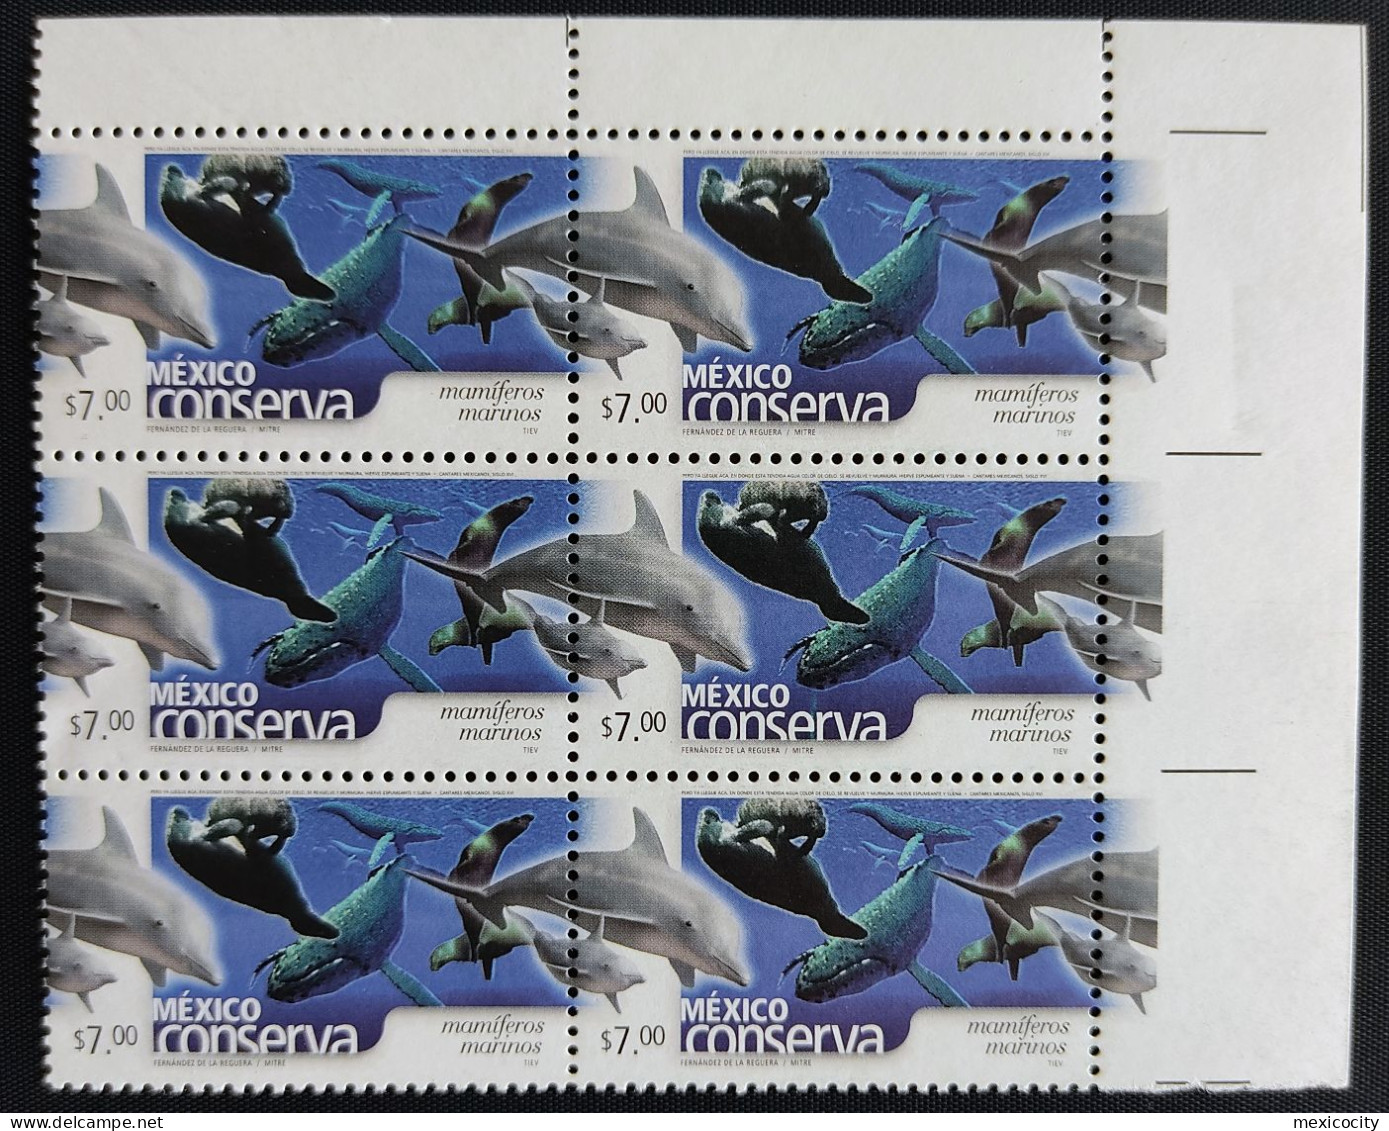 MEXICO 2005 $7 SEA MAMMALS Blk. 6, One With Blue Line Below Whale Flaw, Rare Ptg. Var. MNH Unm. - Mexico